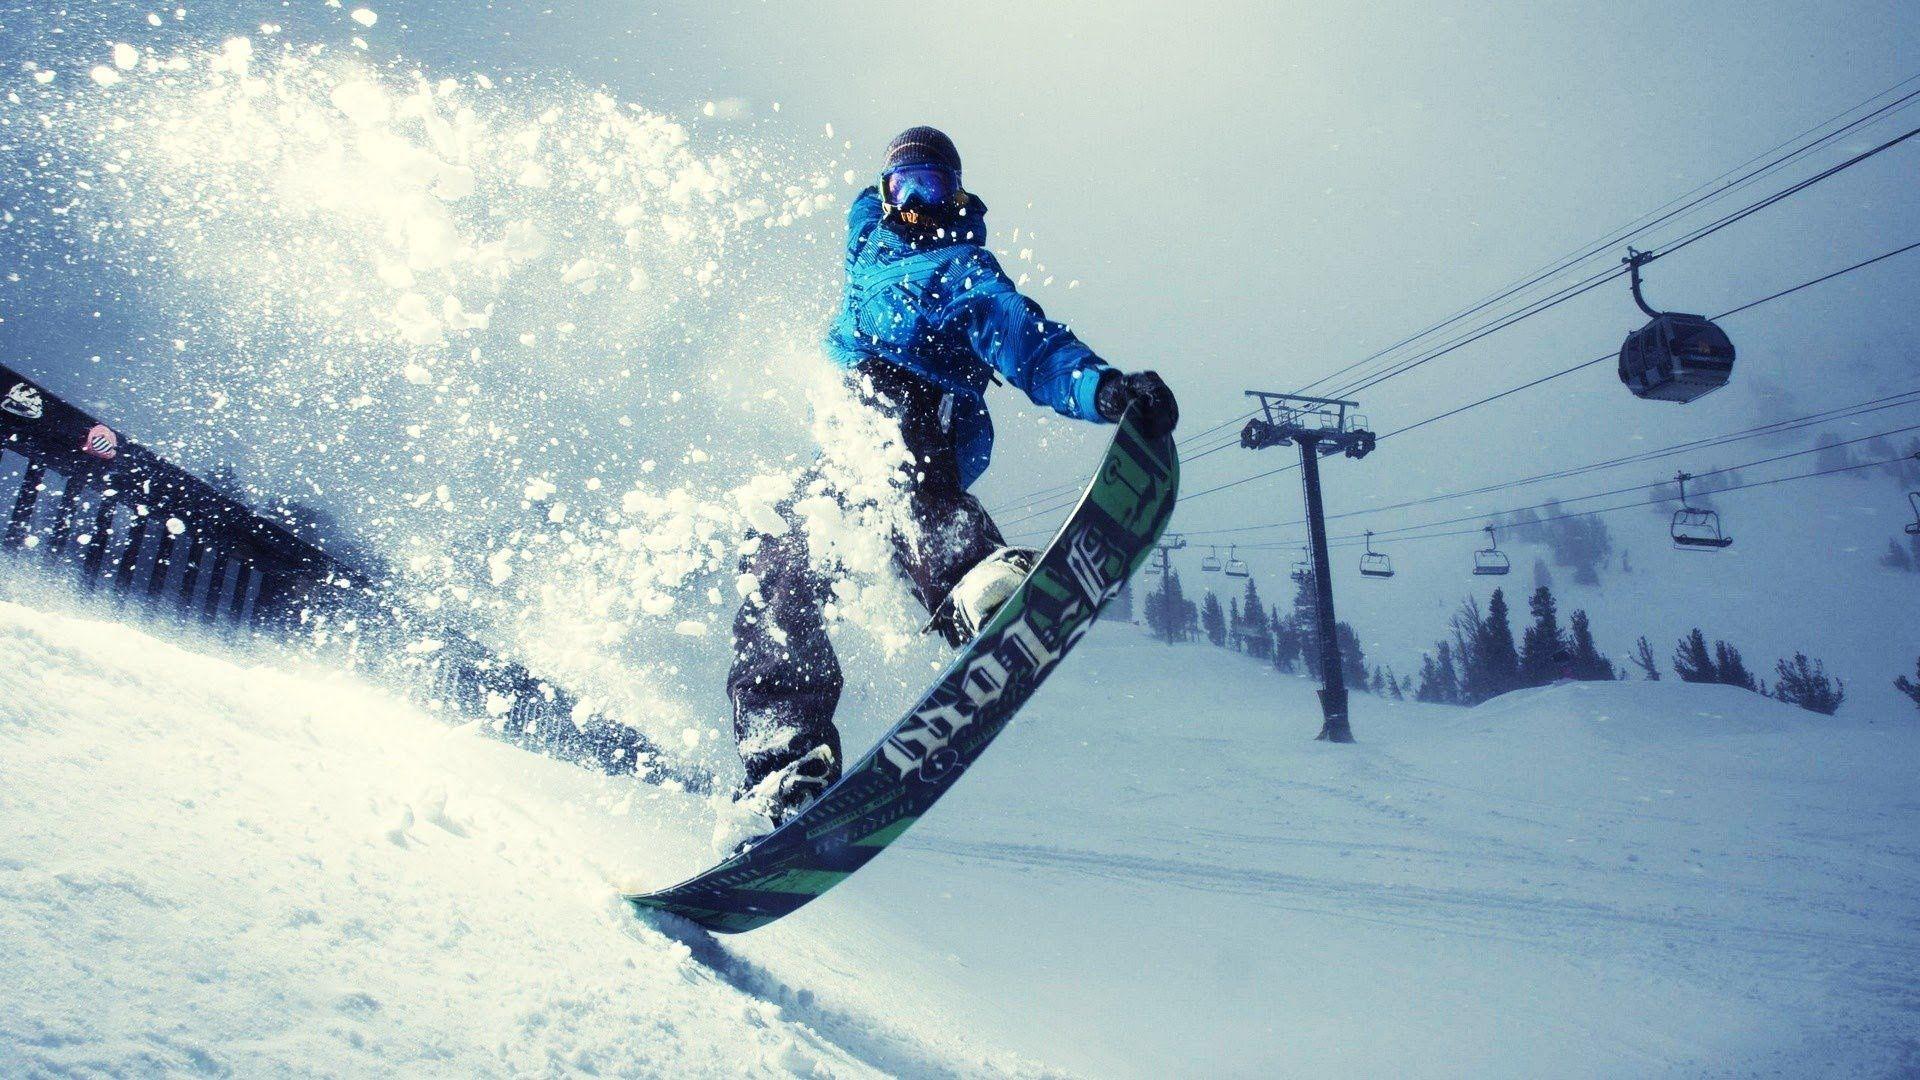 Snowboarding Photos Download The BEST Free Snowboarding Stock Photos  HD  Images